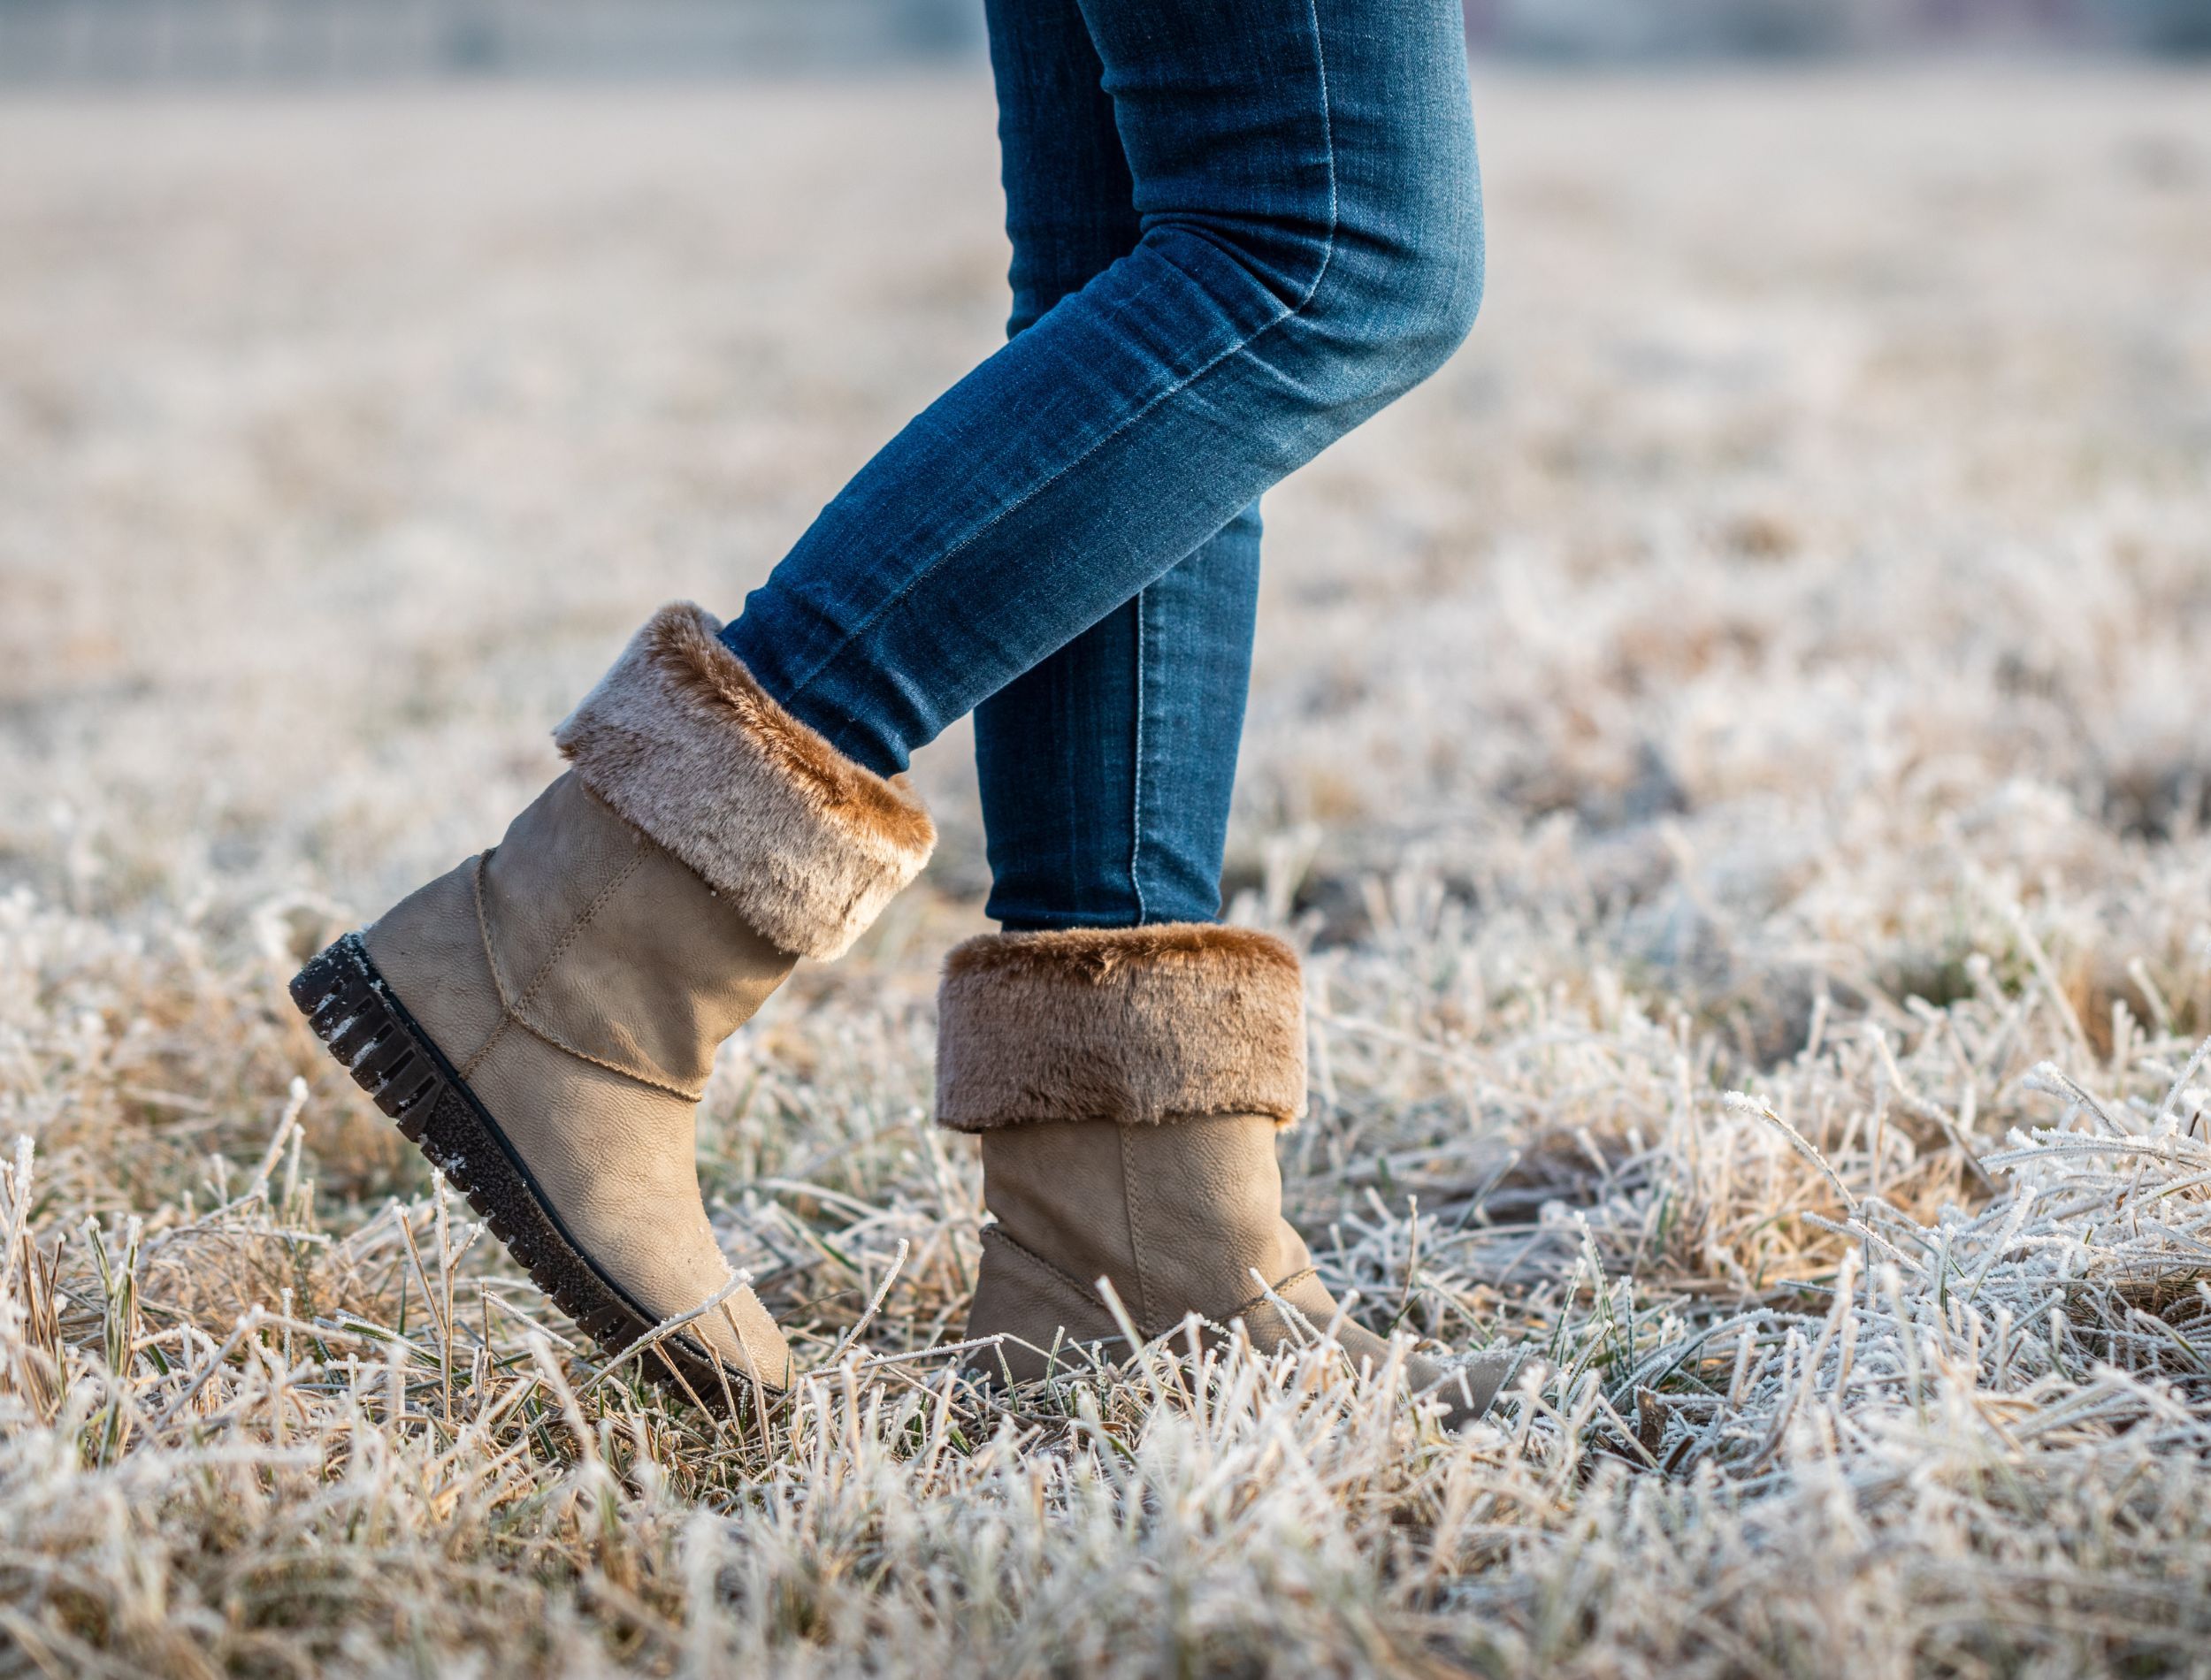 Person wearing winter boots walking across icy frosty grass on a winter lawn